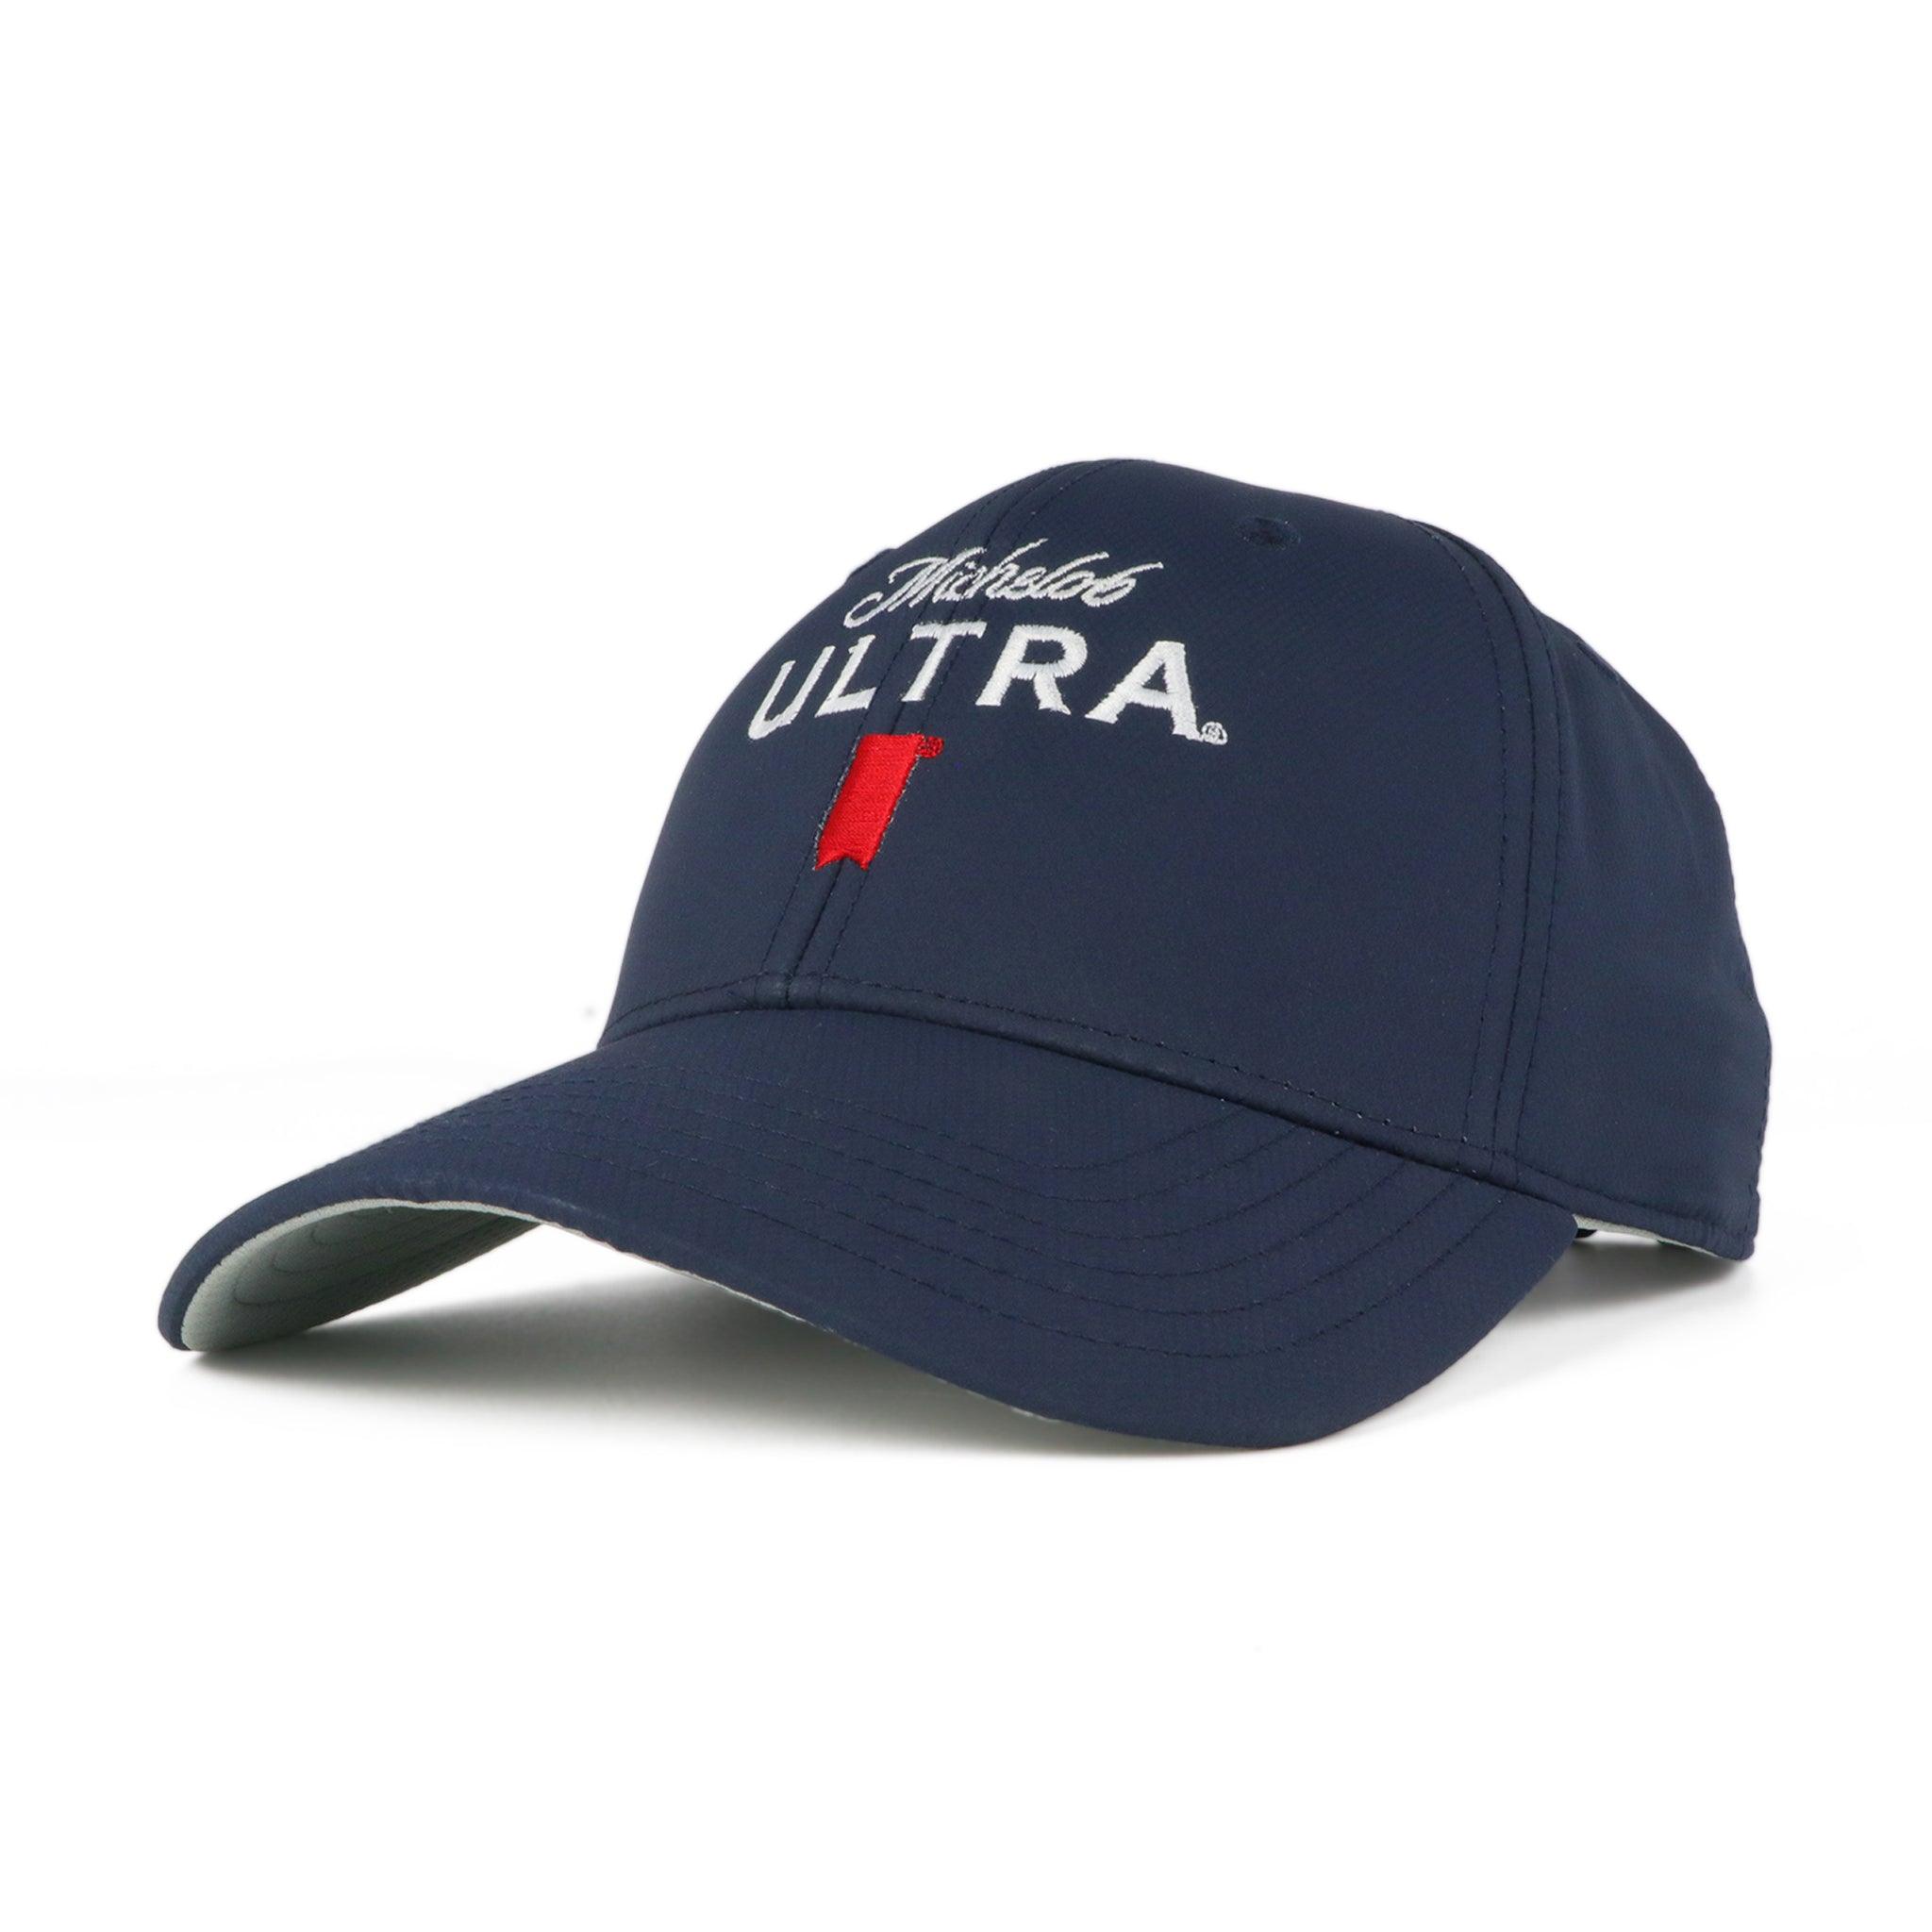 Michelob ULTRA Imperial Hat